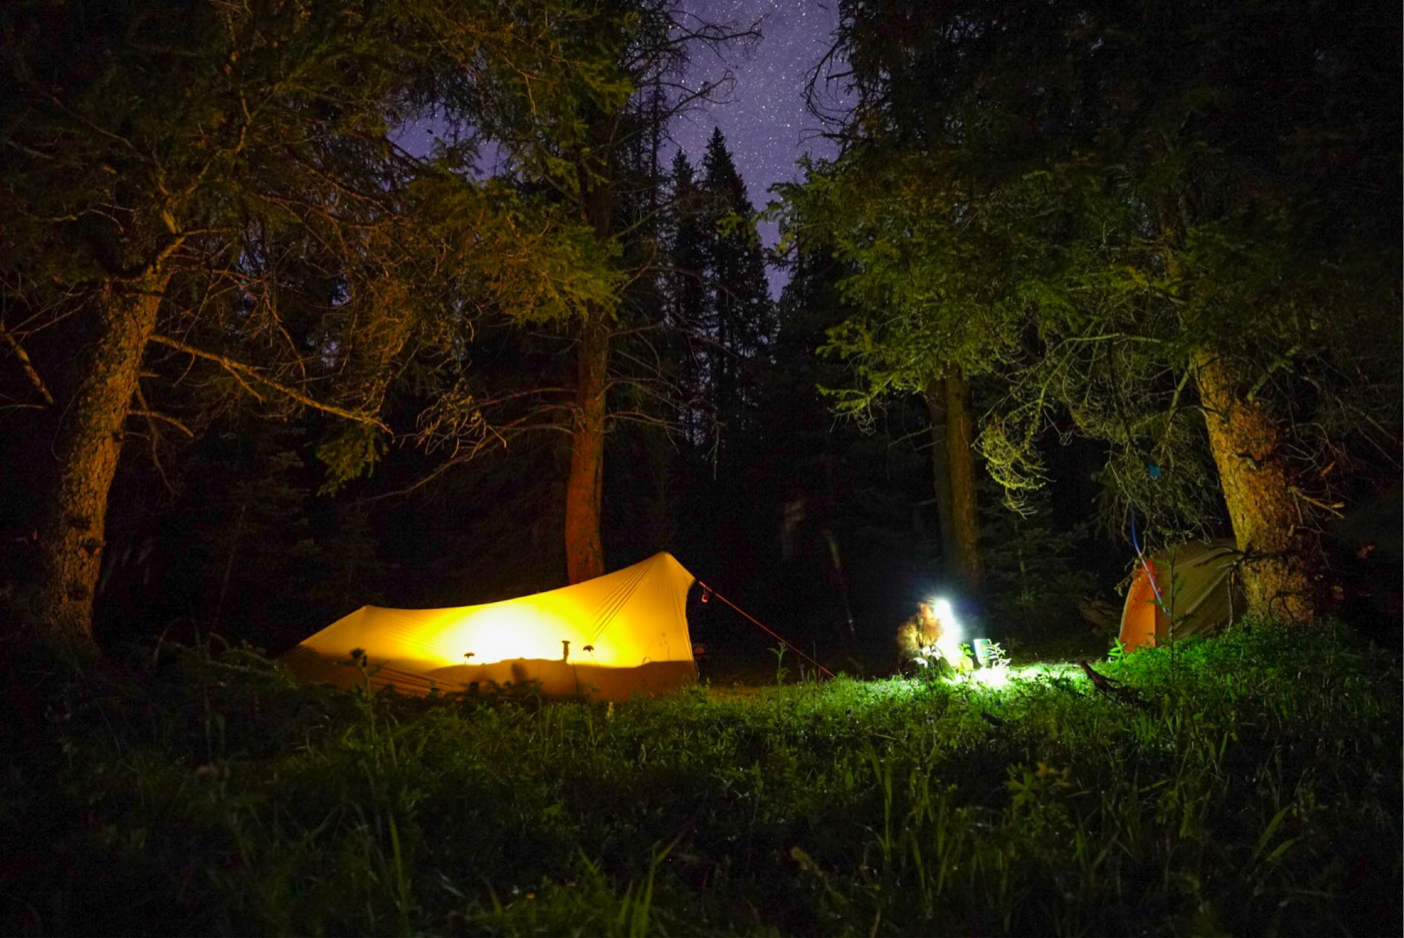 Despite being floorless, the SuperTarp kept the Rocky Mountain bugs at bay throughout the night. Photo by Michael Herne/Coffee or Die.